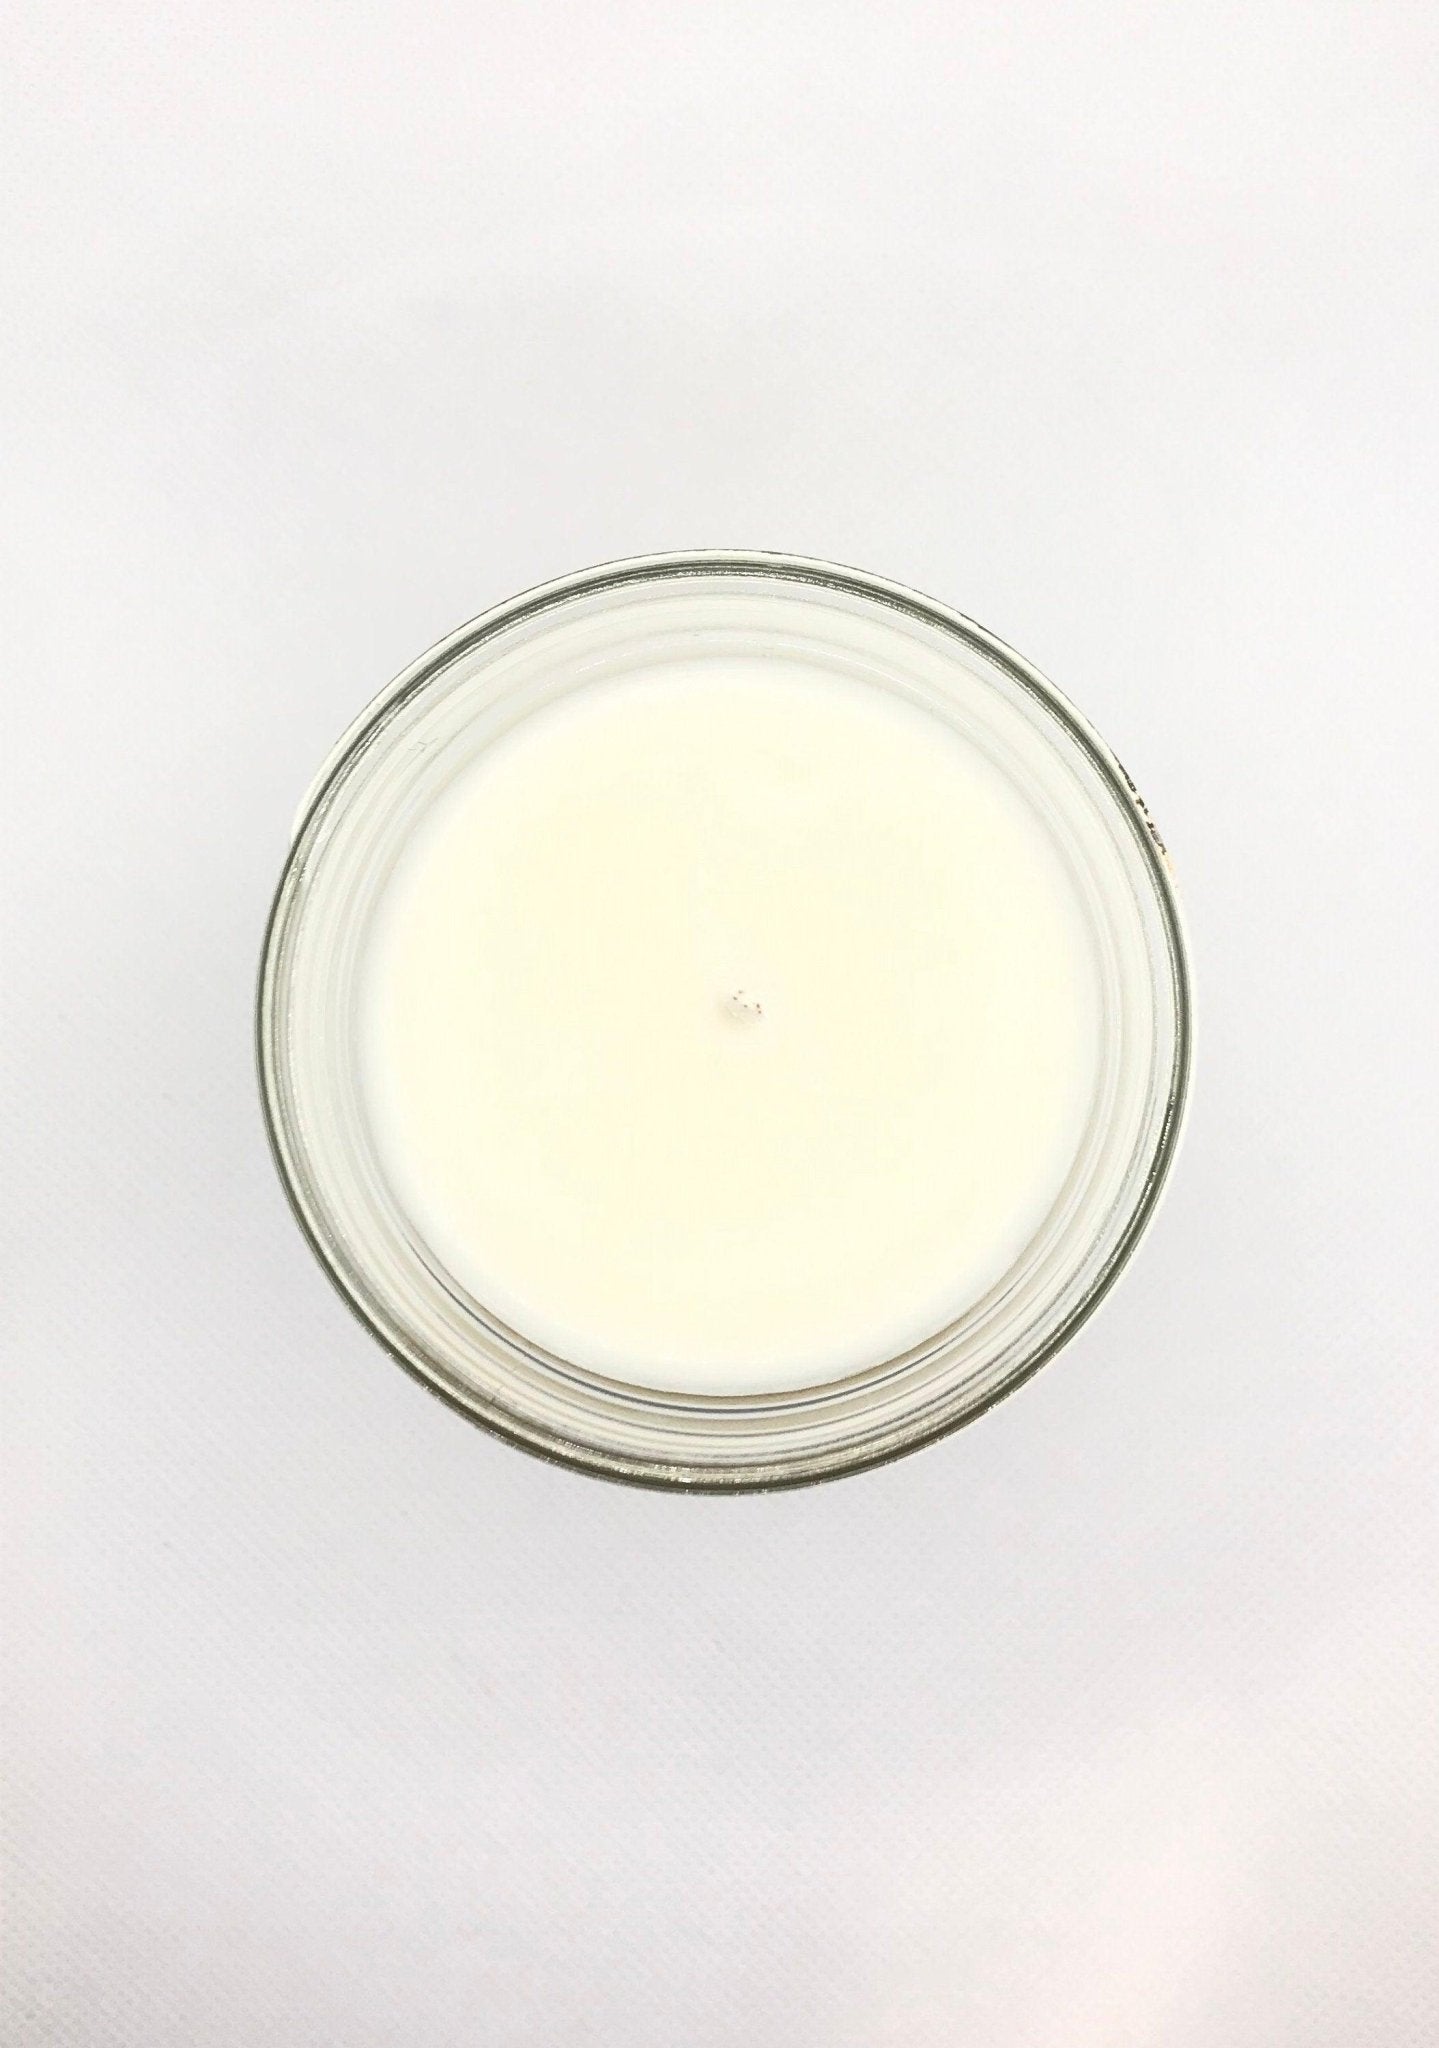 Cotton Blossom Candle - ScentWick Candles